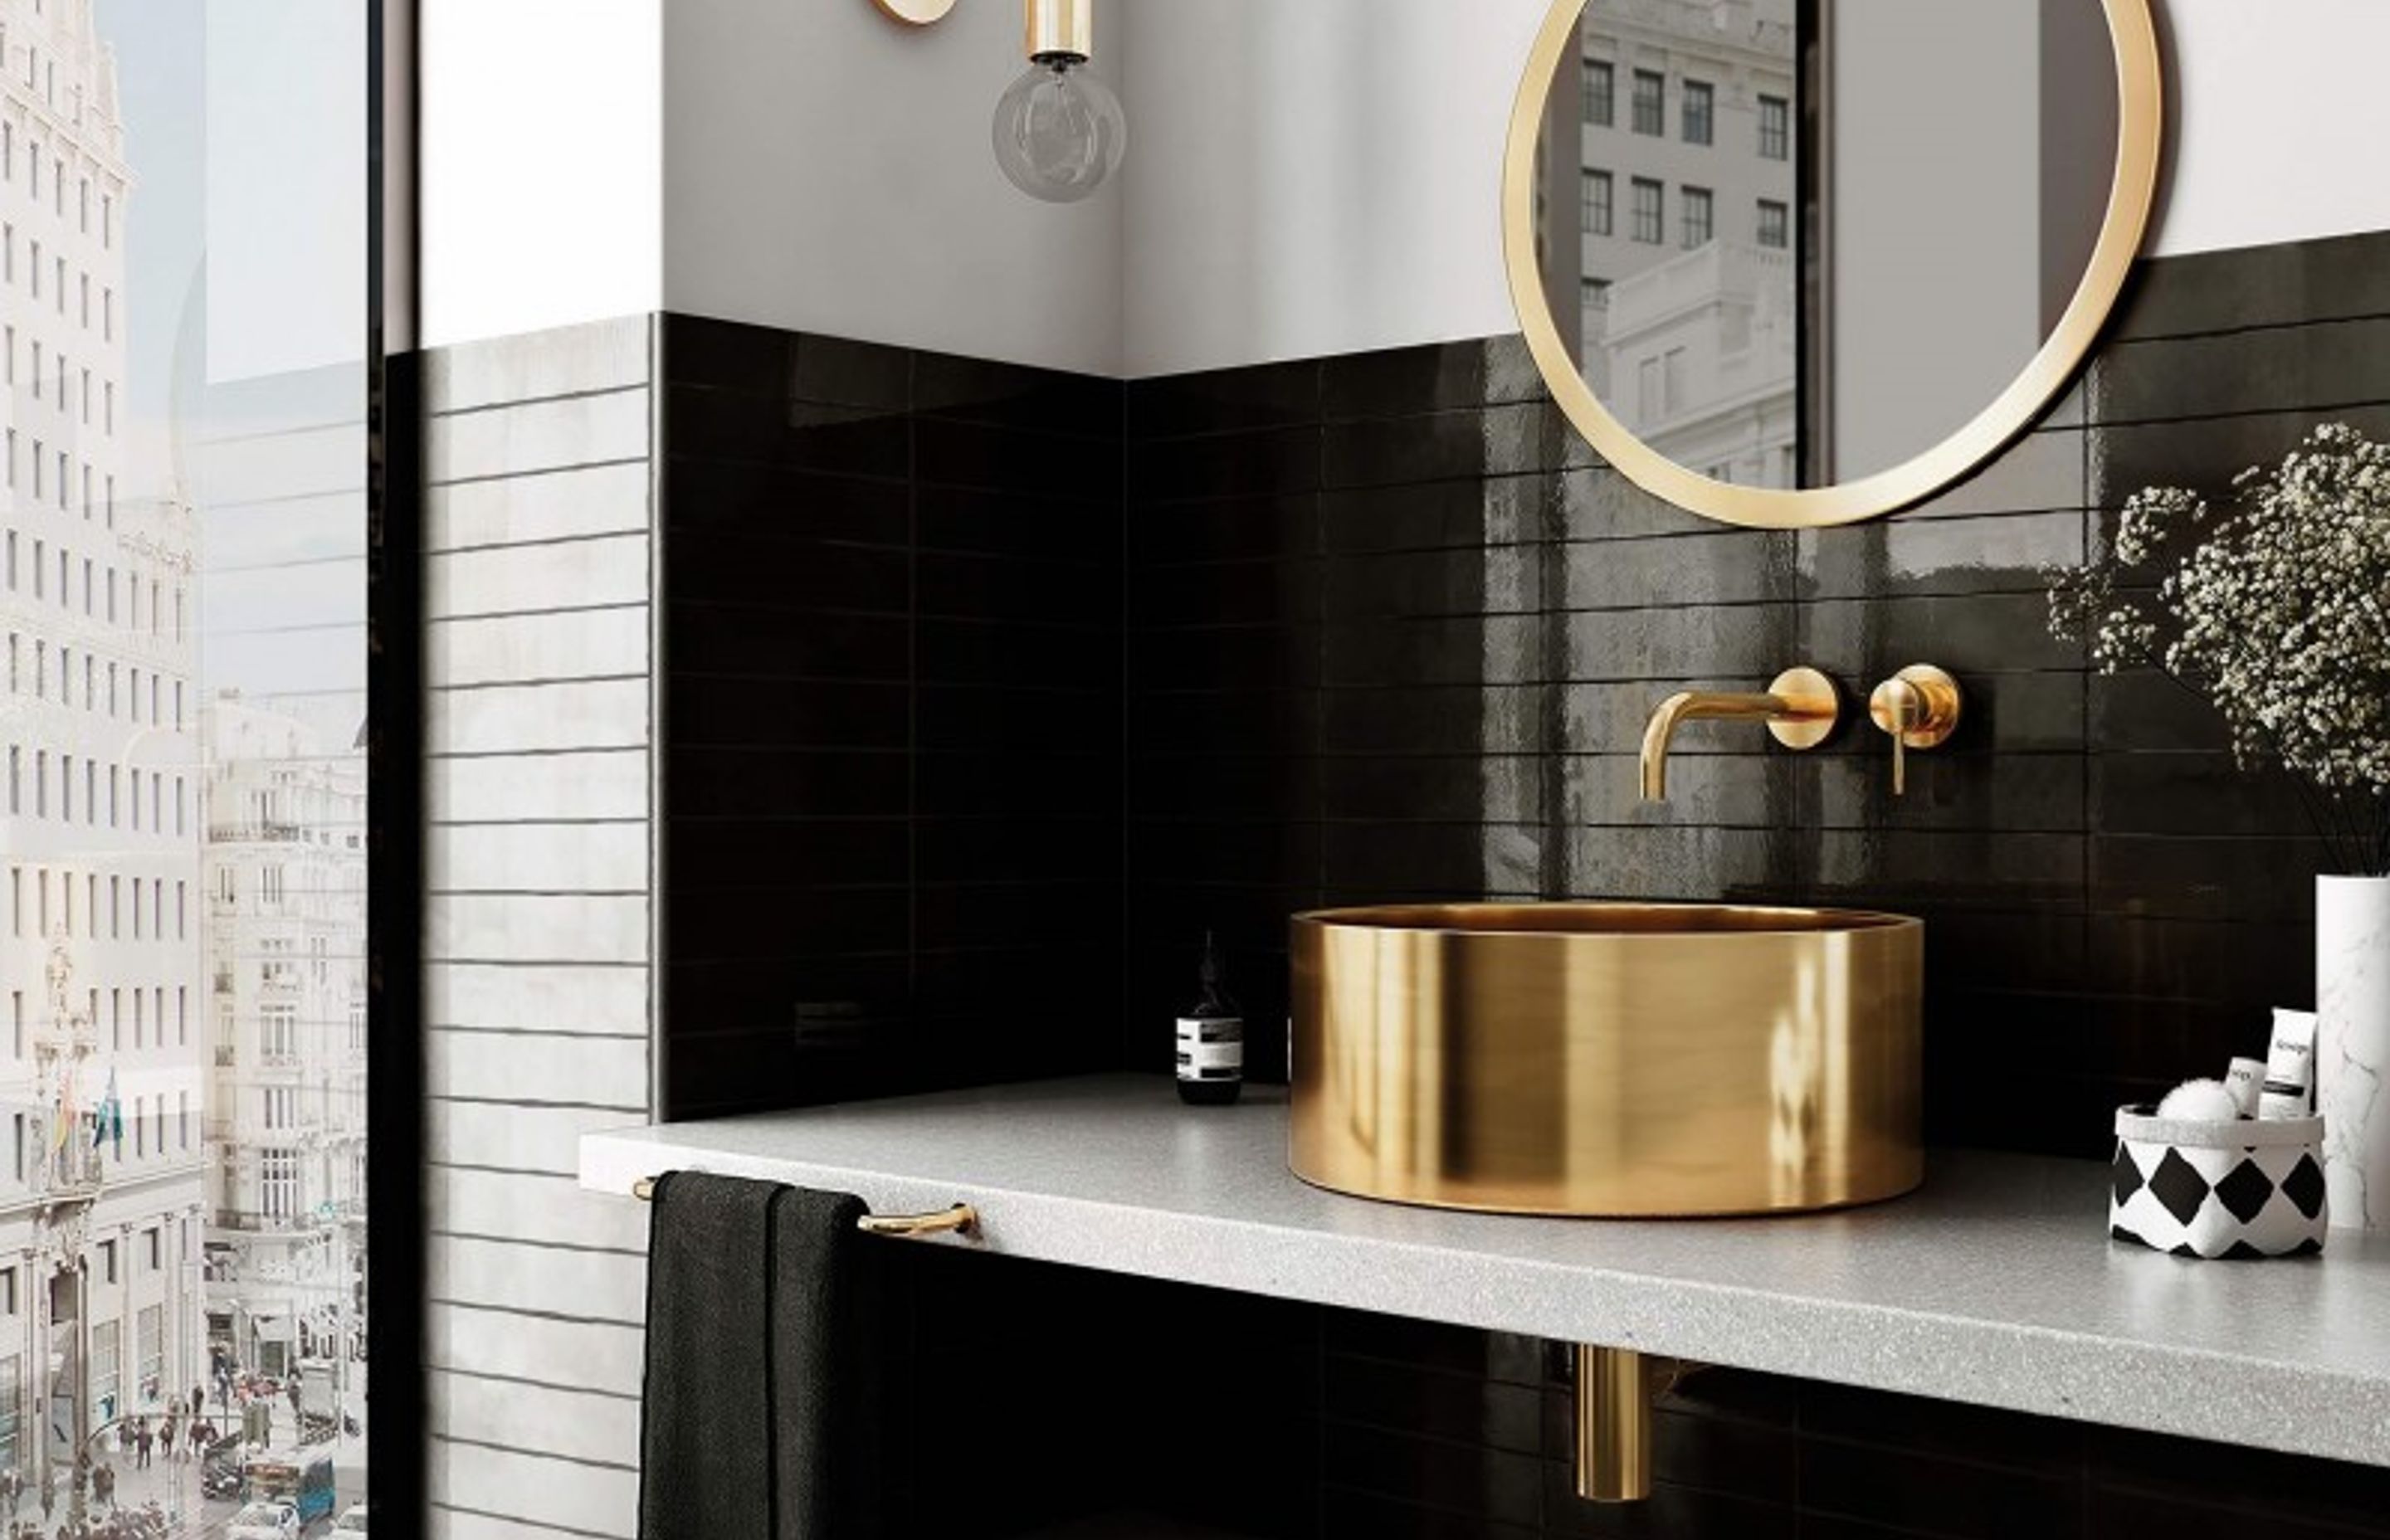 Example of metallic finishes | (Photo credit: Tile Depot)